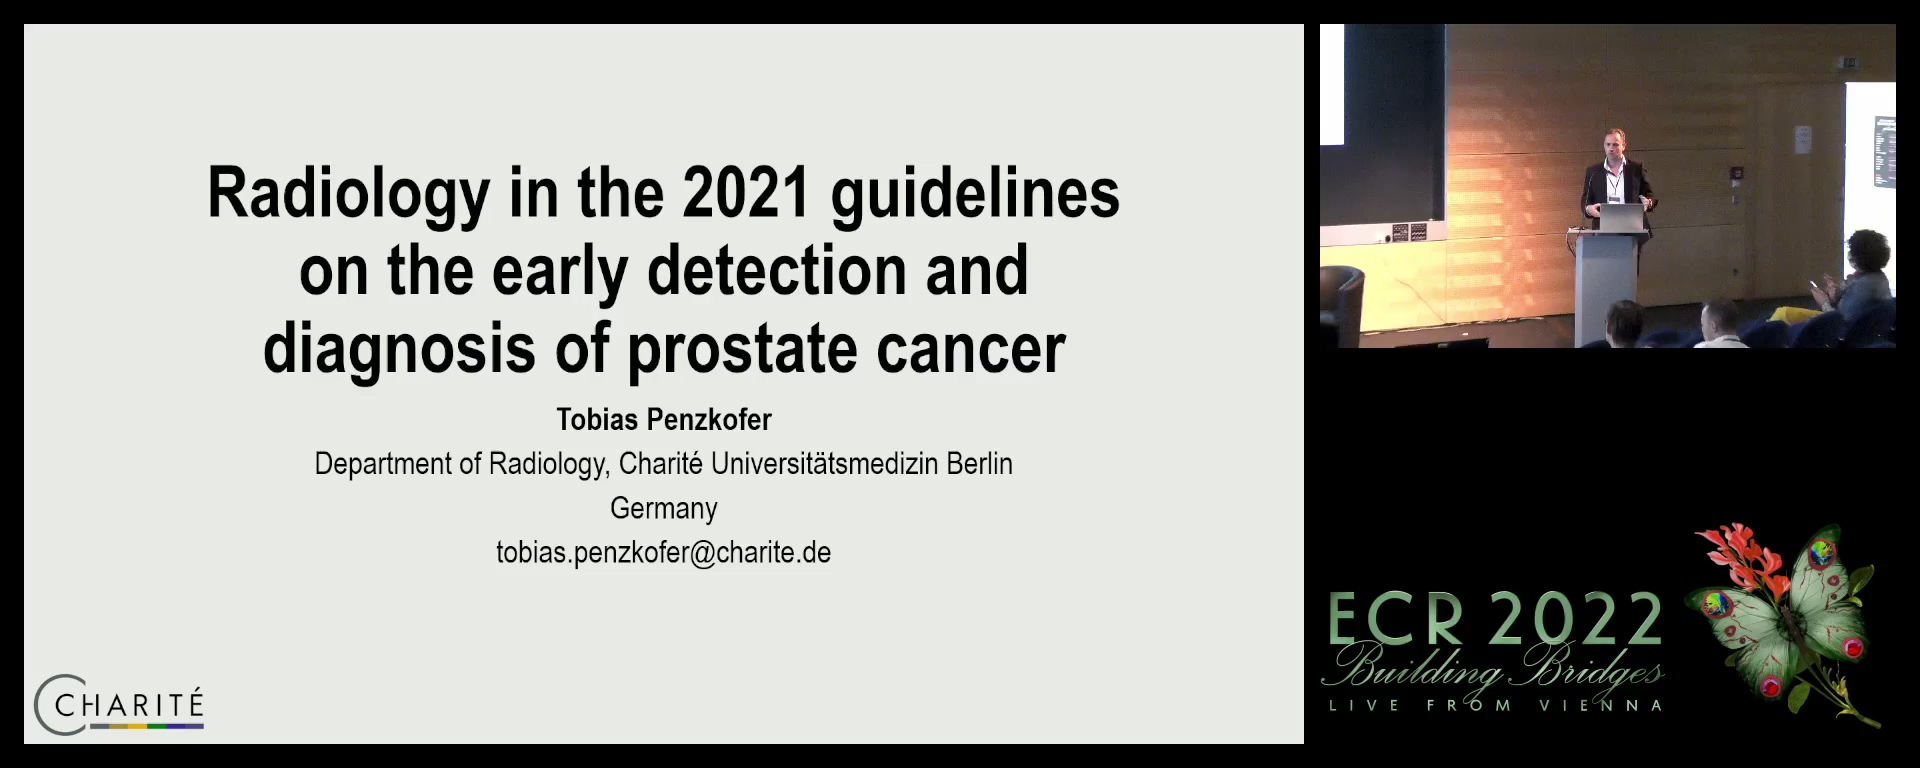 Radiology in the 2021 guidelines on the early detection and diagnosis of prostate cancer - Tobias Penzkofer, Berlin / DE